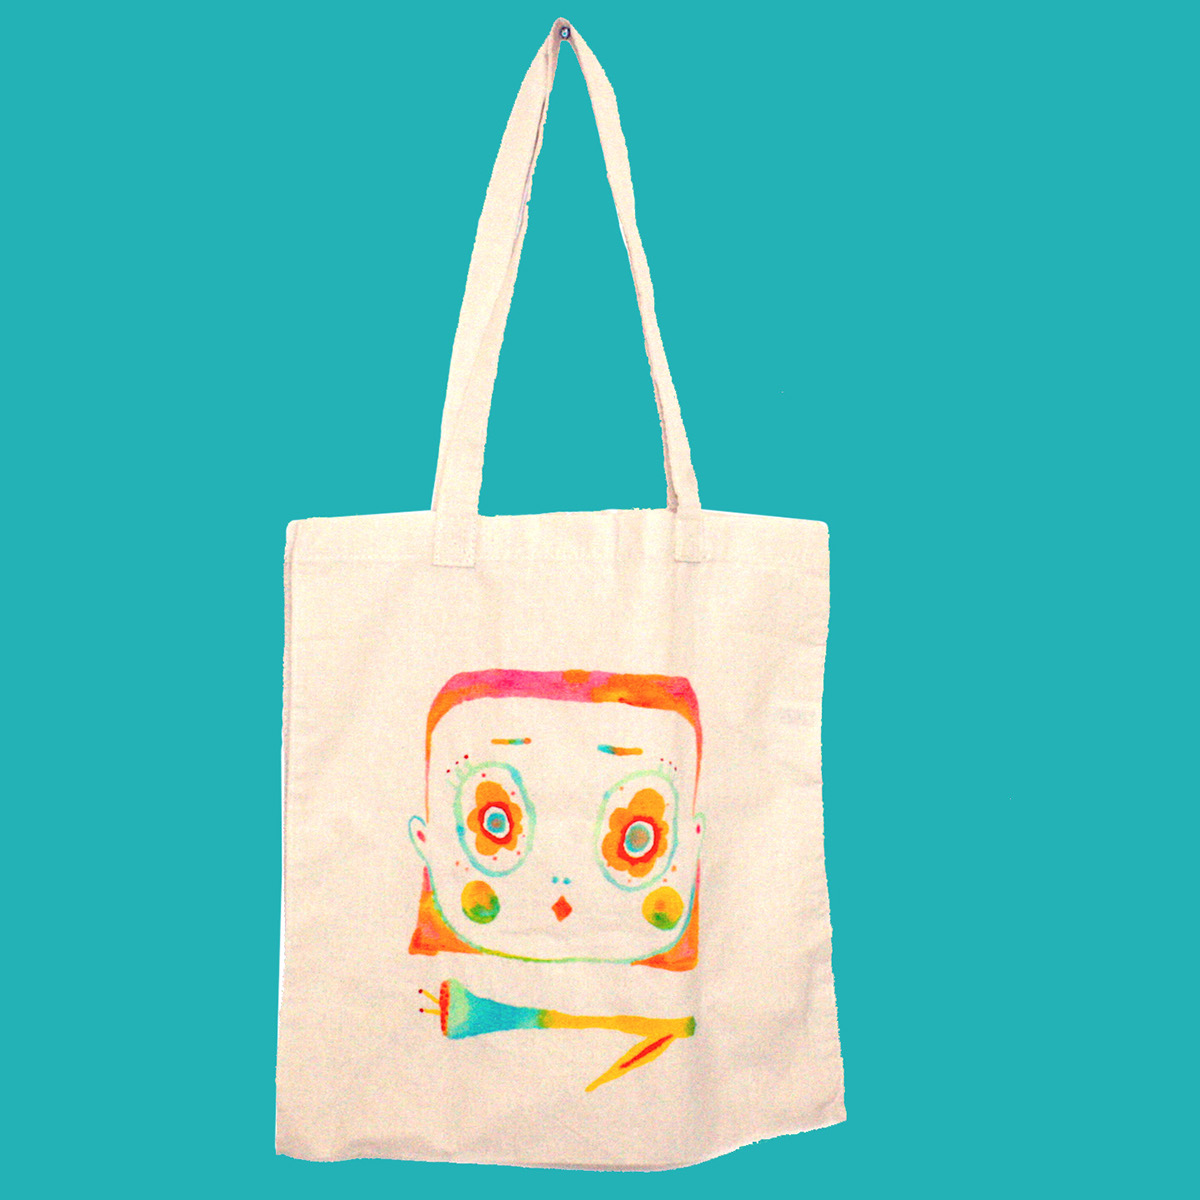 Fabric Painting Tote Bag Illustrated Tote hand drawn illustrated product product design 